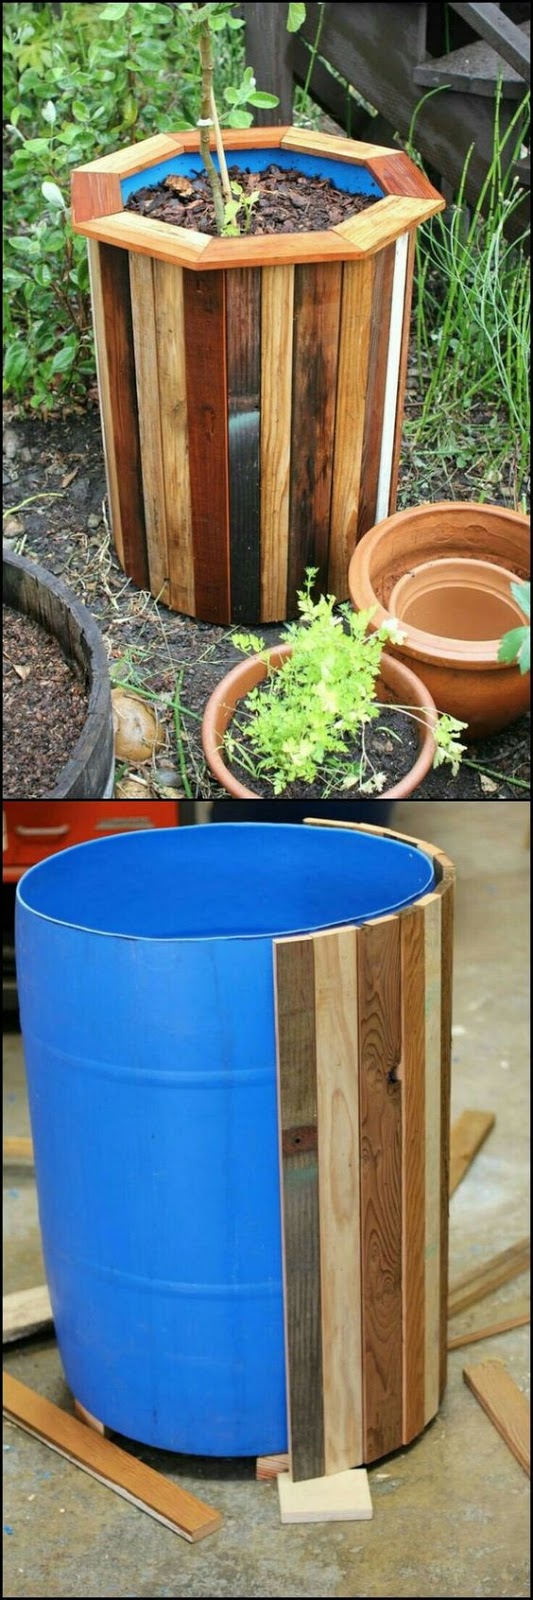 Gardenology: Possible Garden Projects!